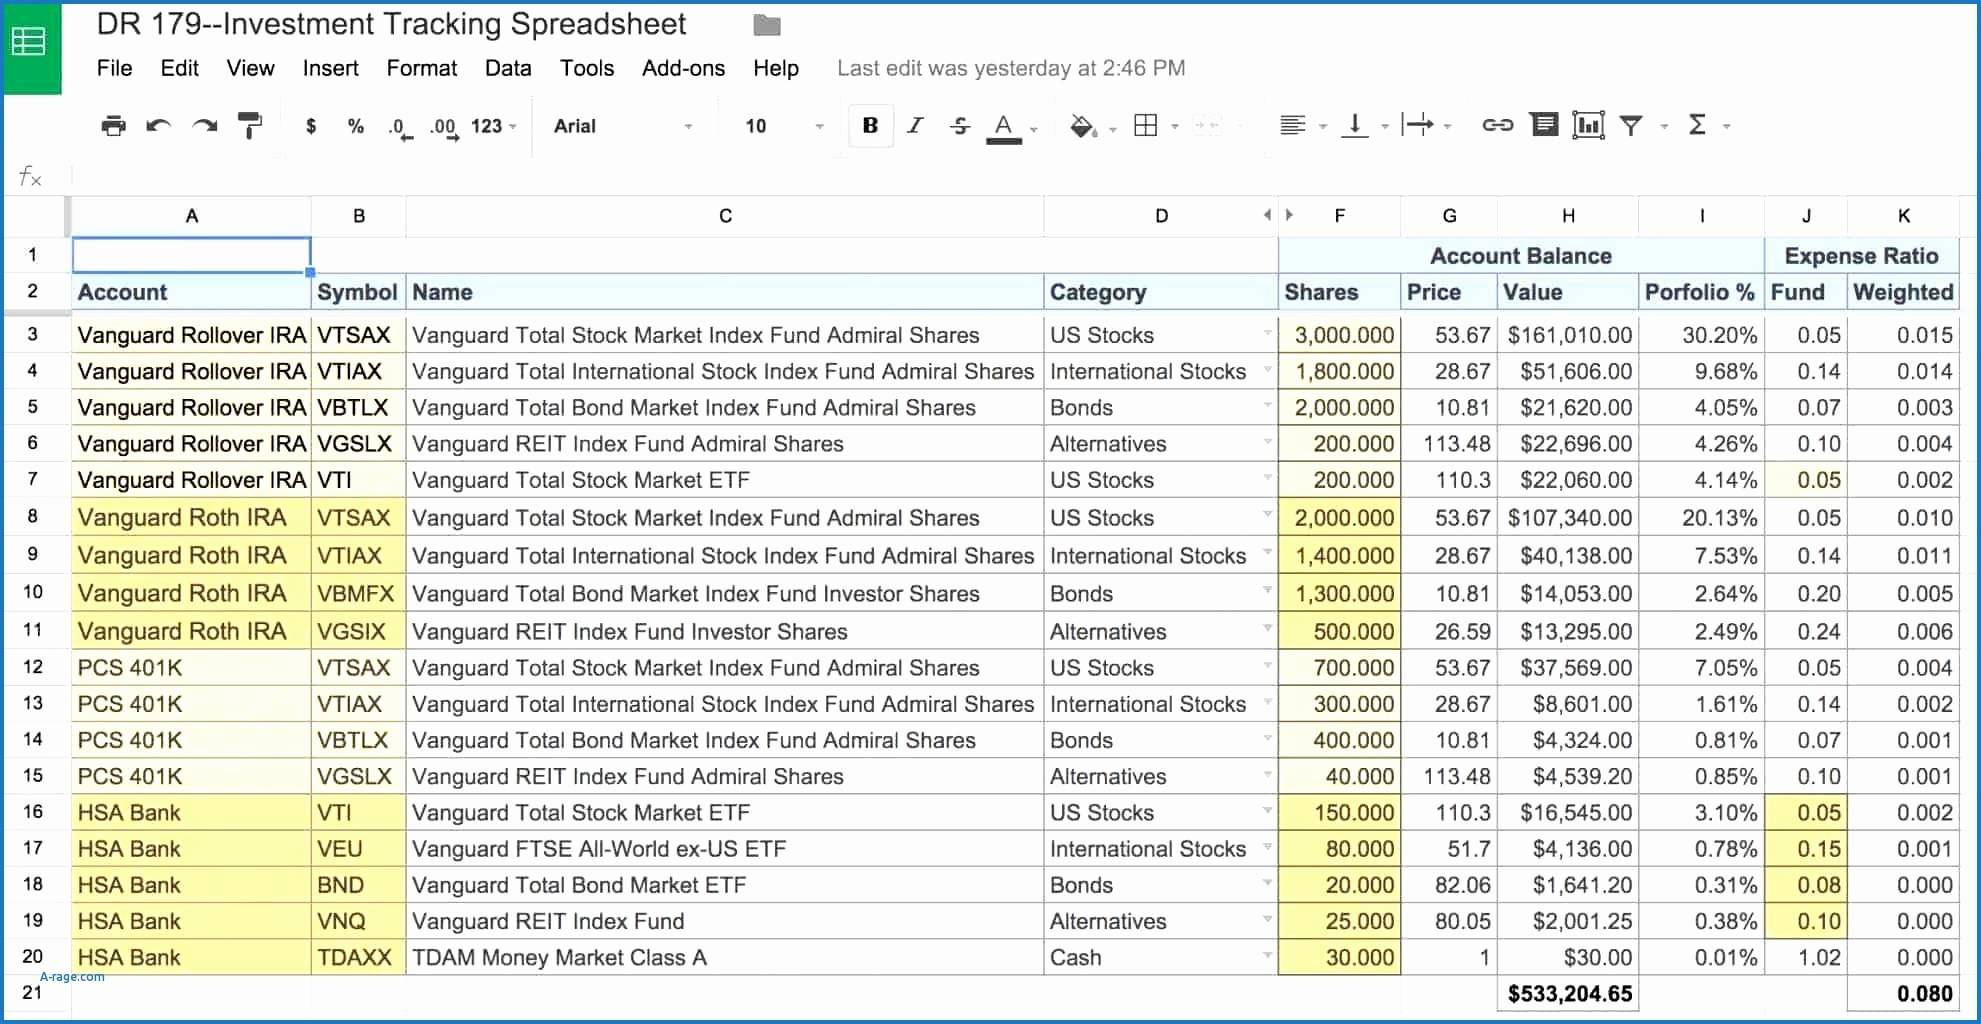 Contract Renewal Tracking Spreadsheet Within Excel Contract Management Database With Free Tracking Spreadsheet